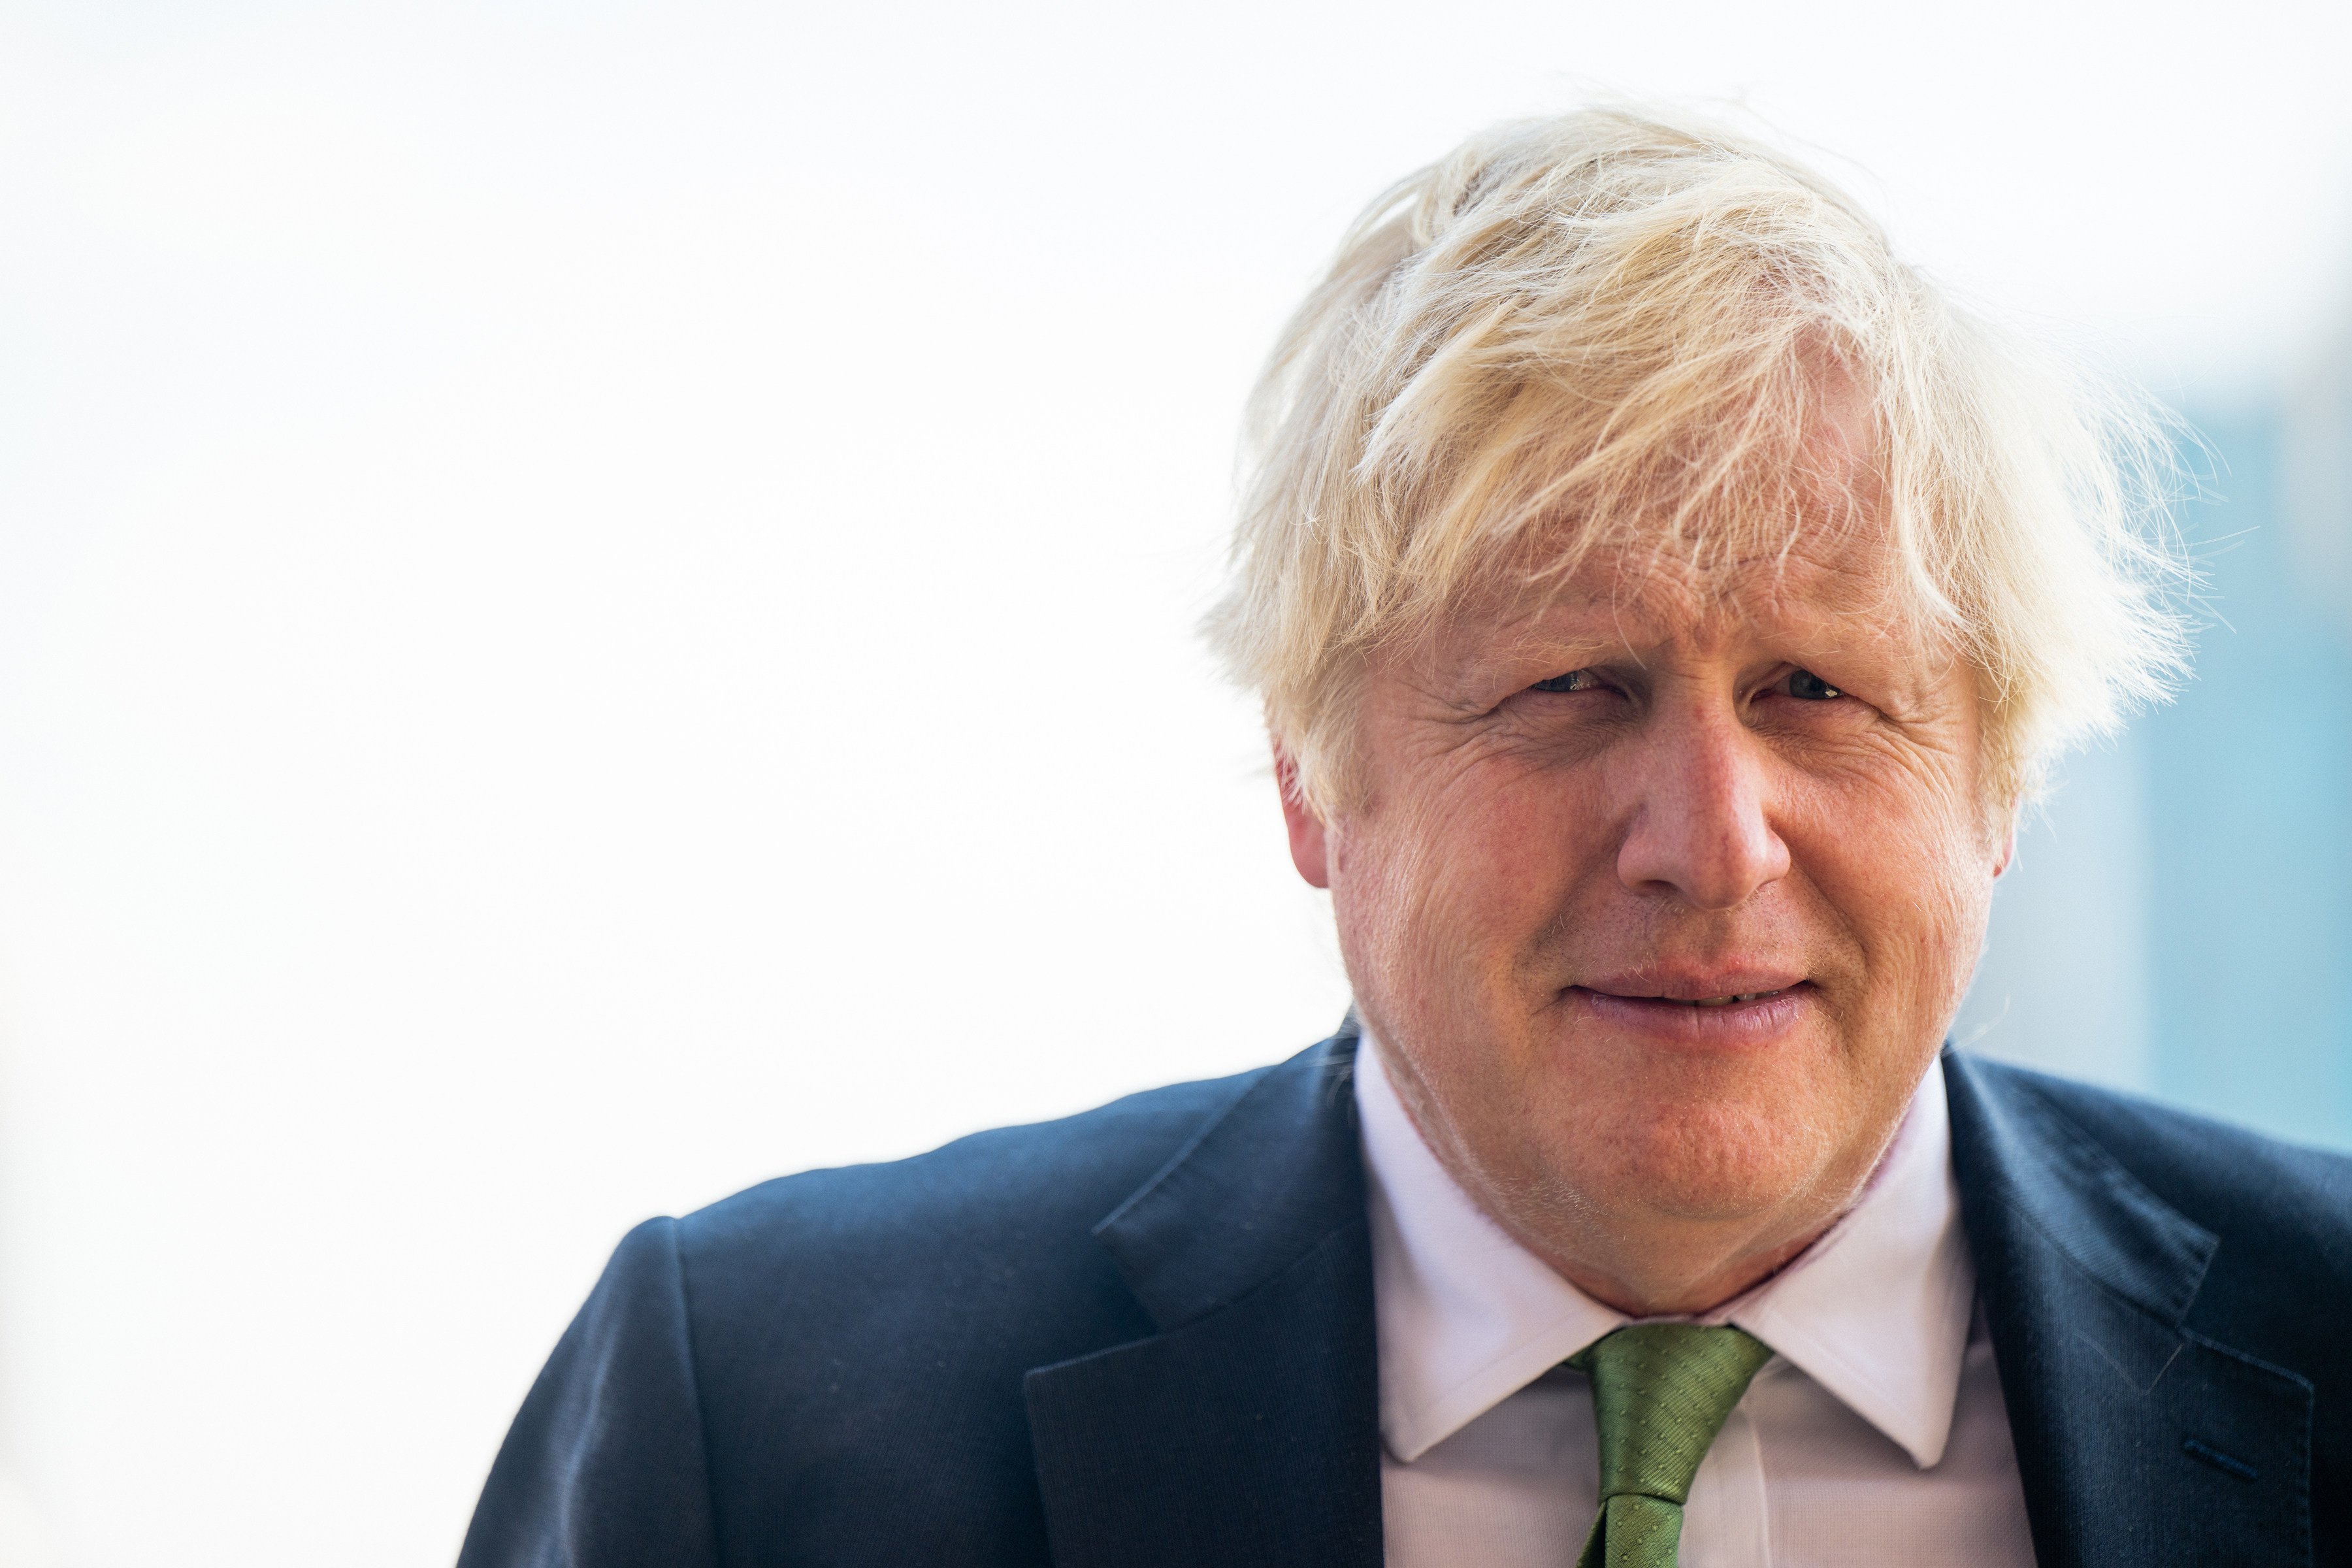 The decisions of former British PM Boris Johnson’s government during the Covid-19 pandemic have been endlessly debated. Photo: TNS